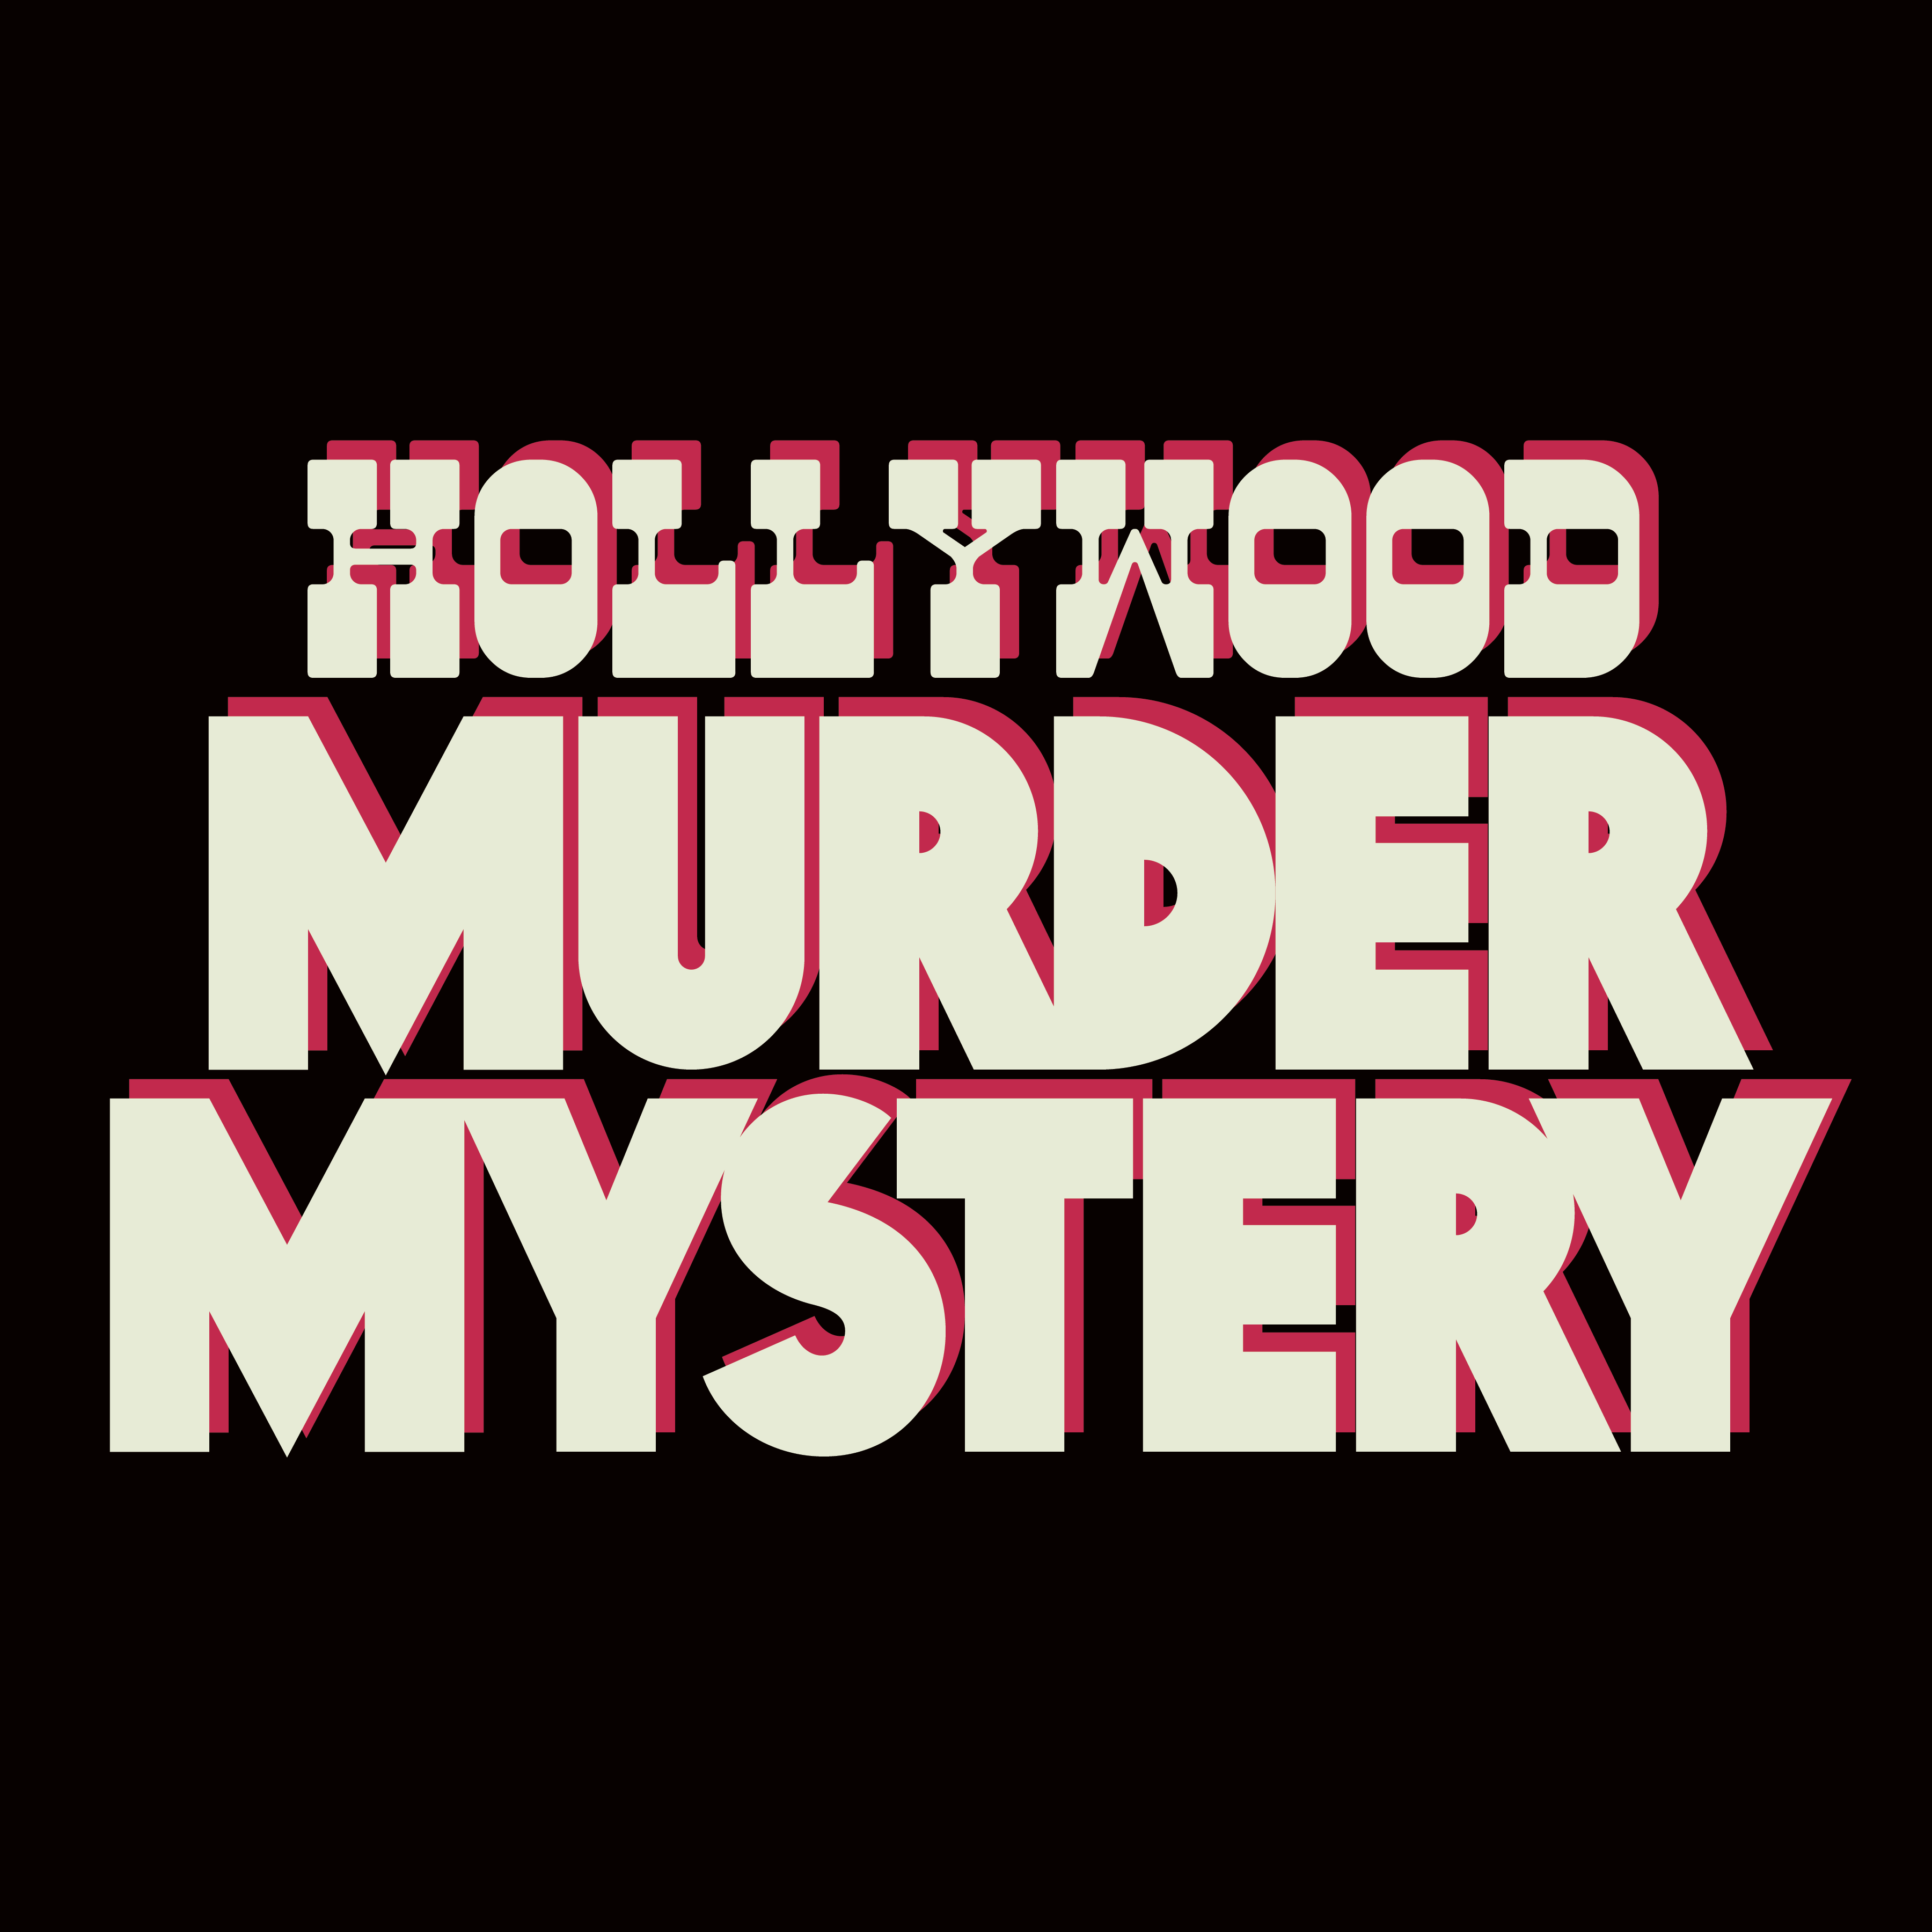 Red and off-white Hollywood Murder Mystery logo on a black background.